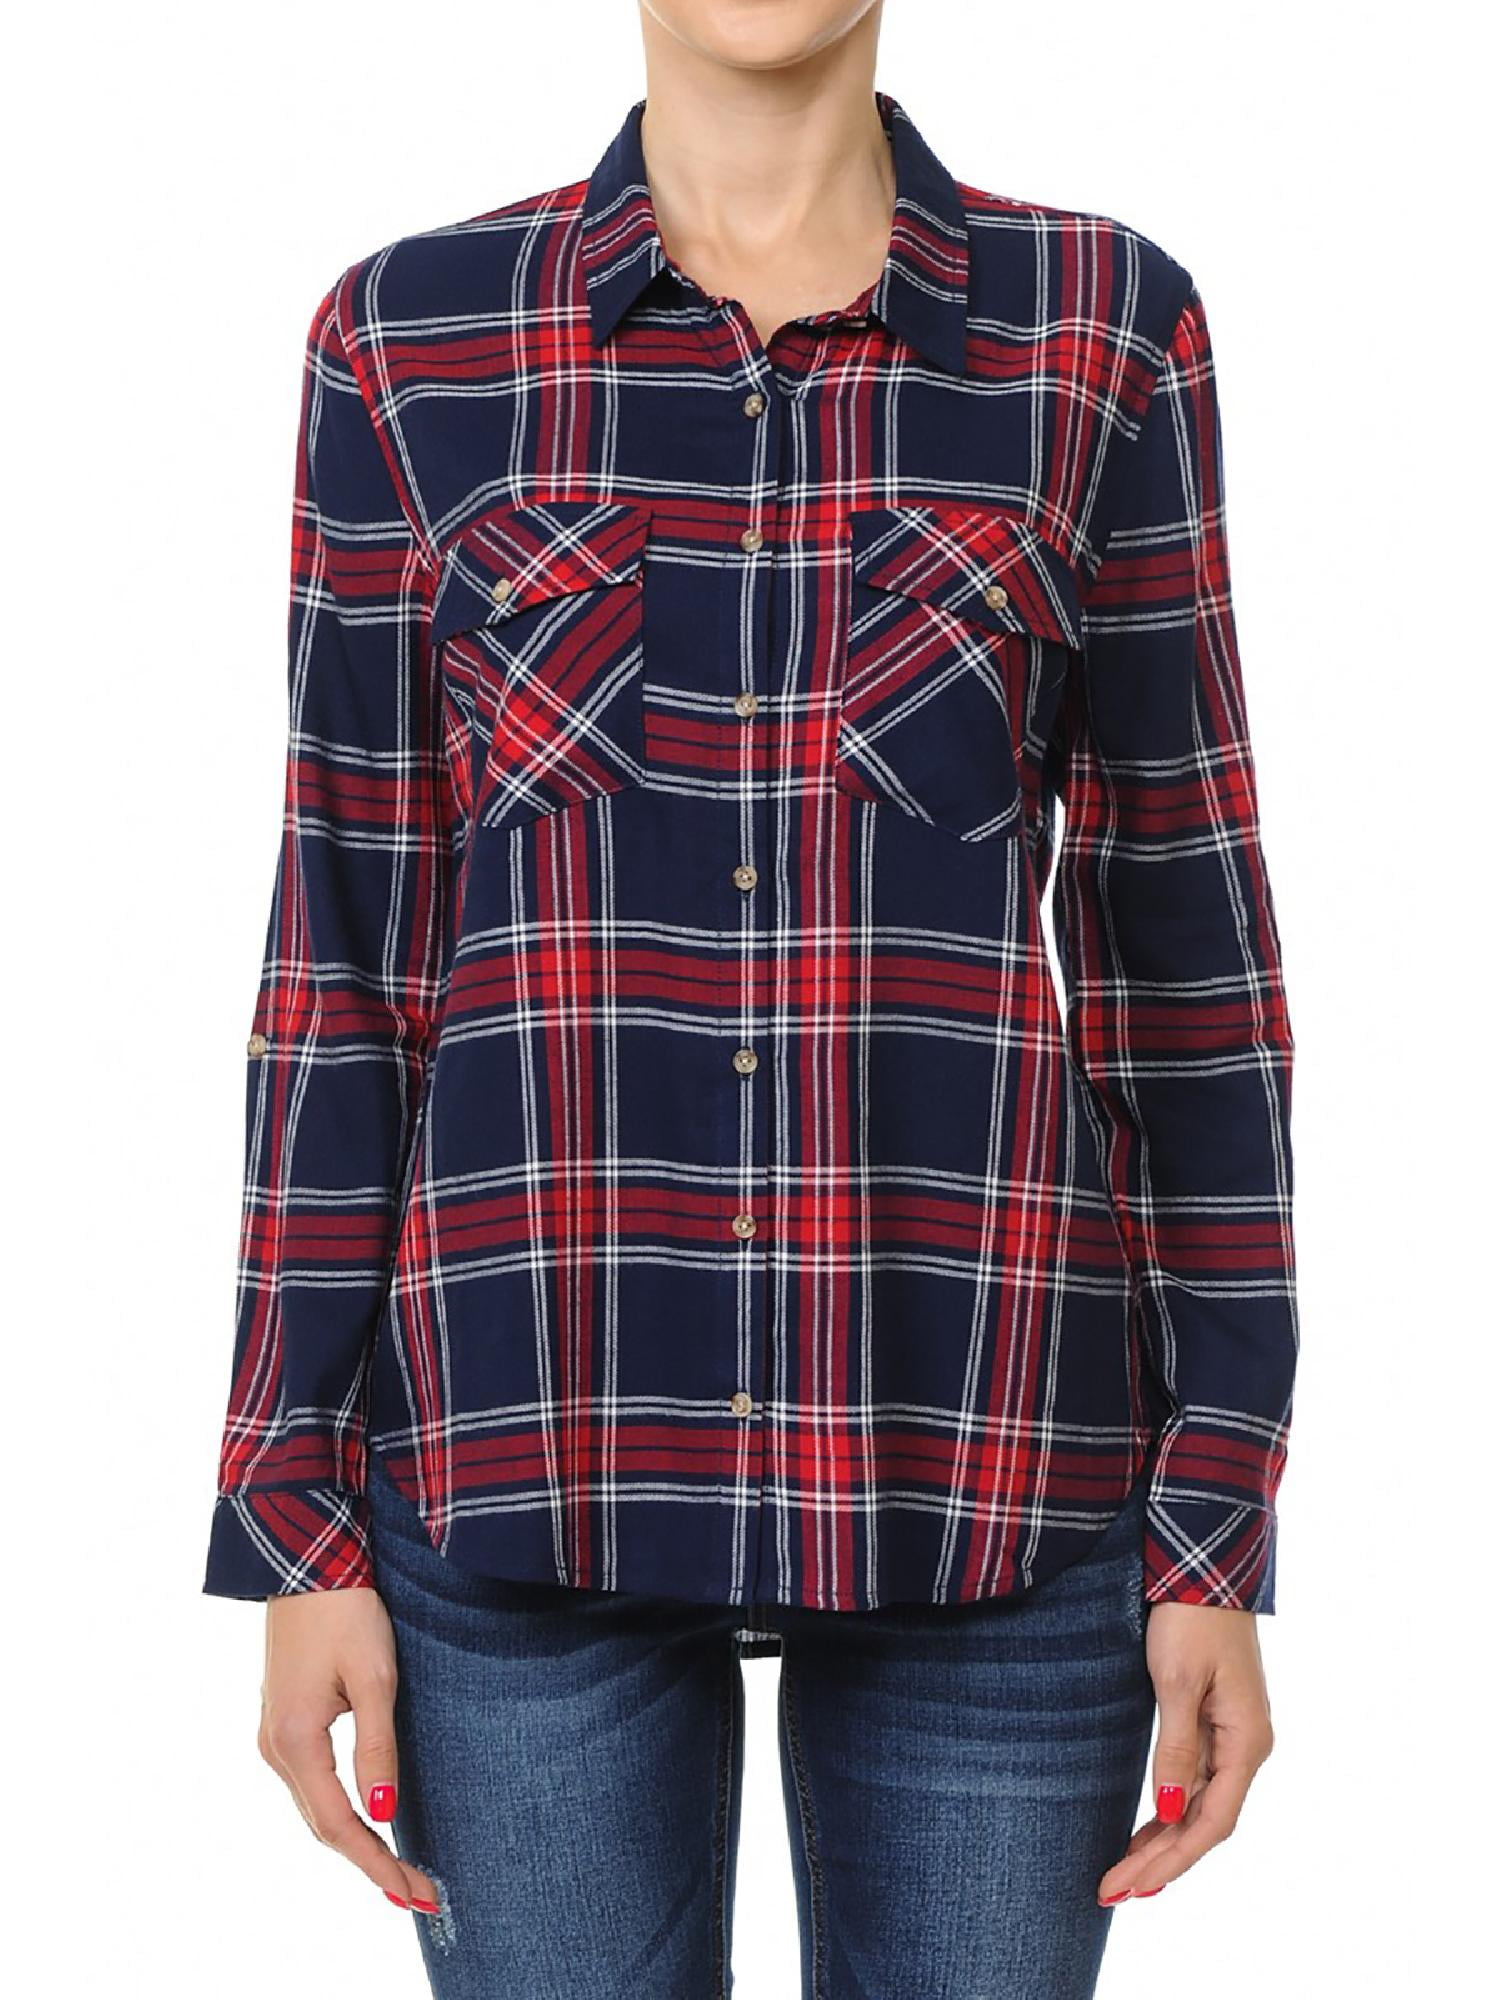 Design by Olivia Women/'s Roll Up Long Sleeved Button Down Collared Plaid Shirt